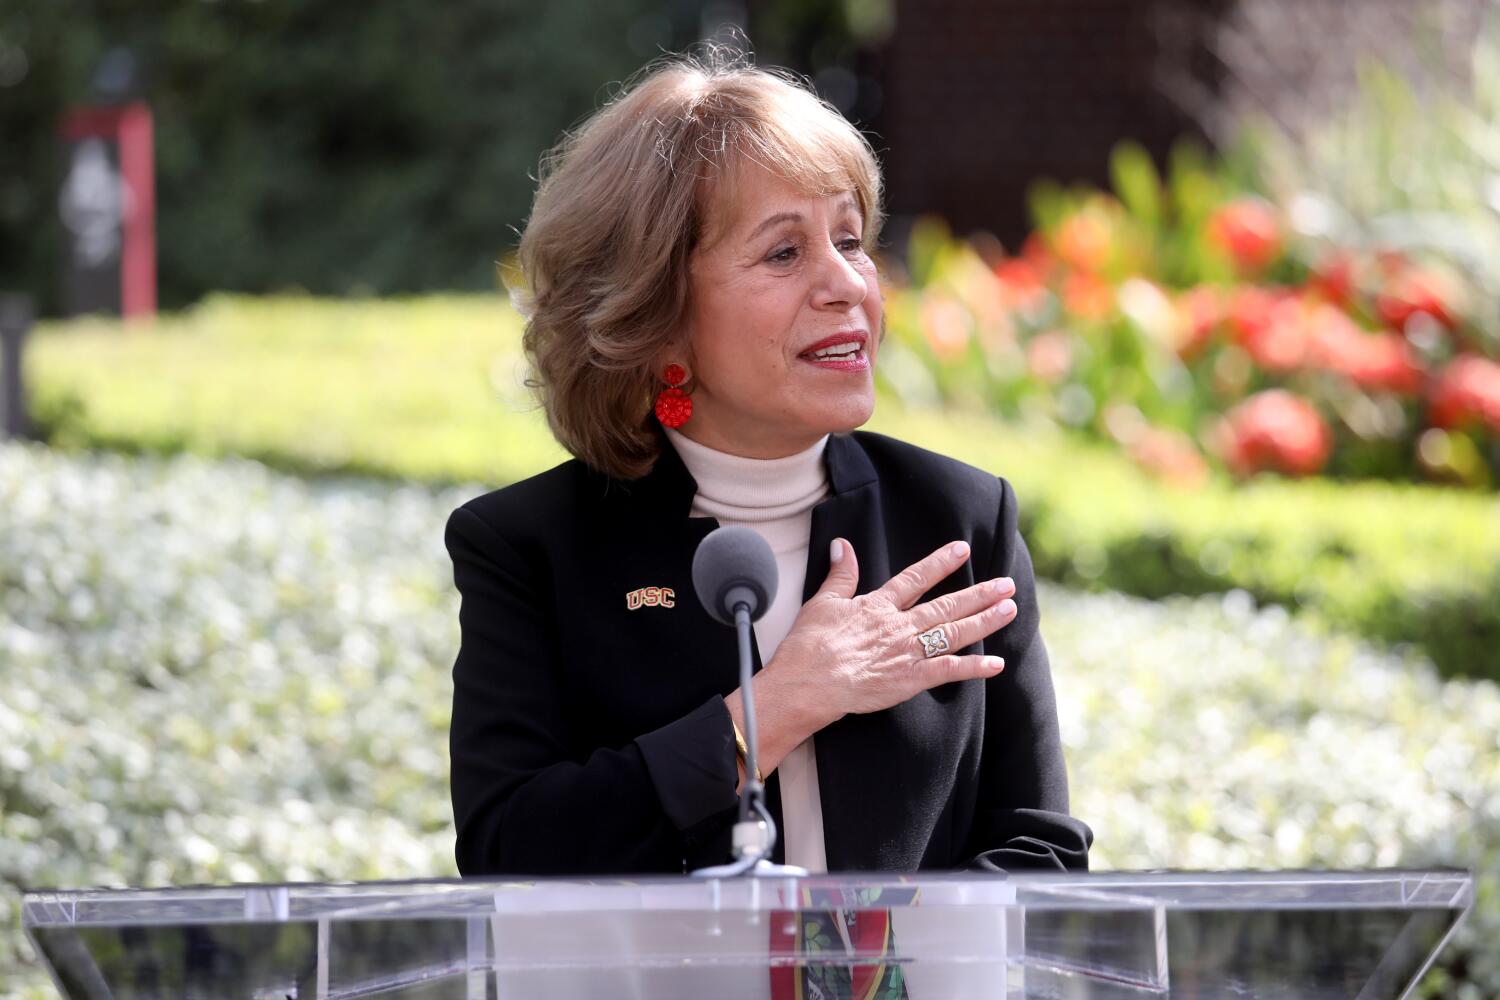 Jailed students, a canceled commencement, angry parents: USC's Carol Folt takes on critics